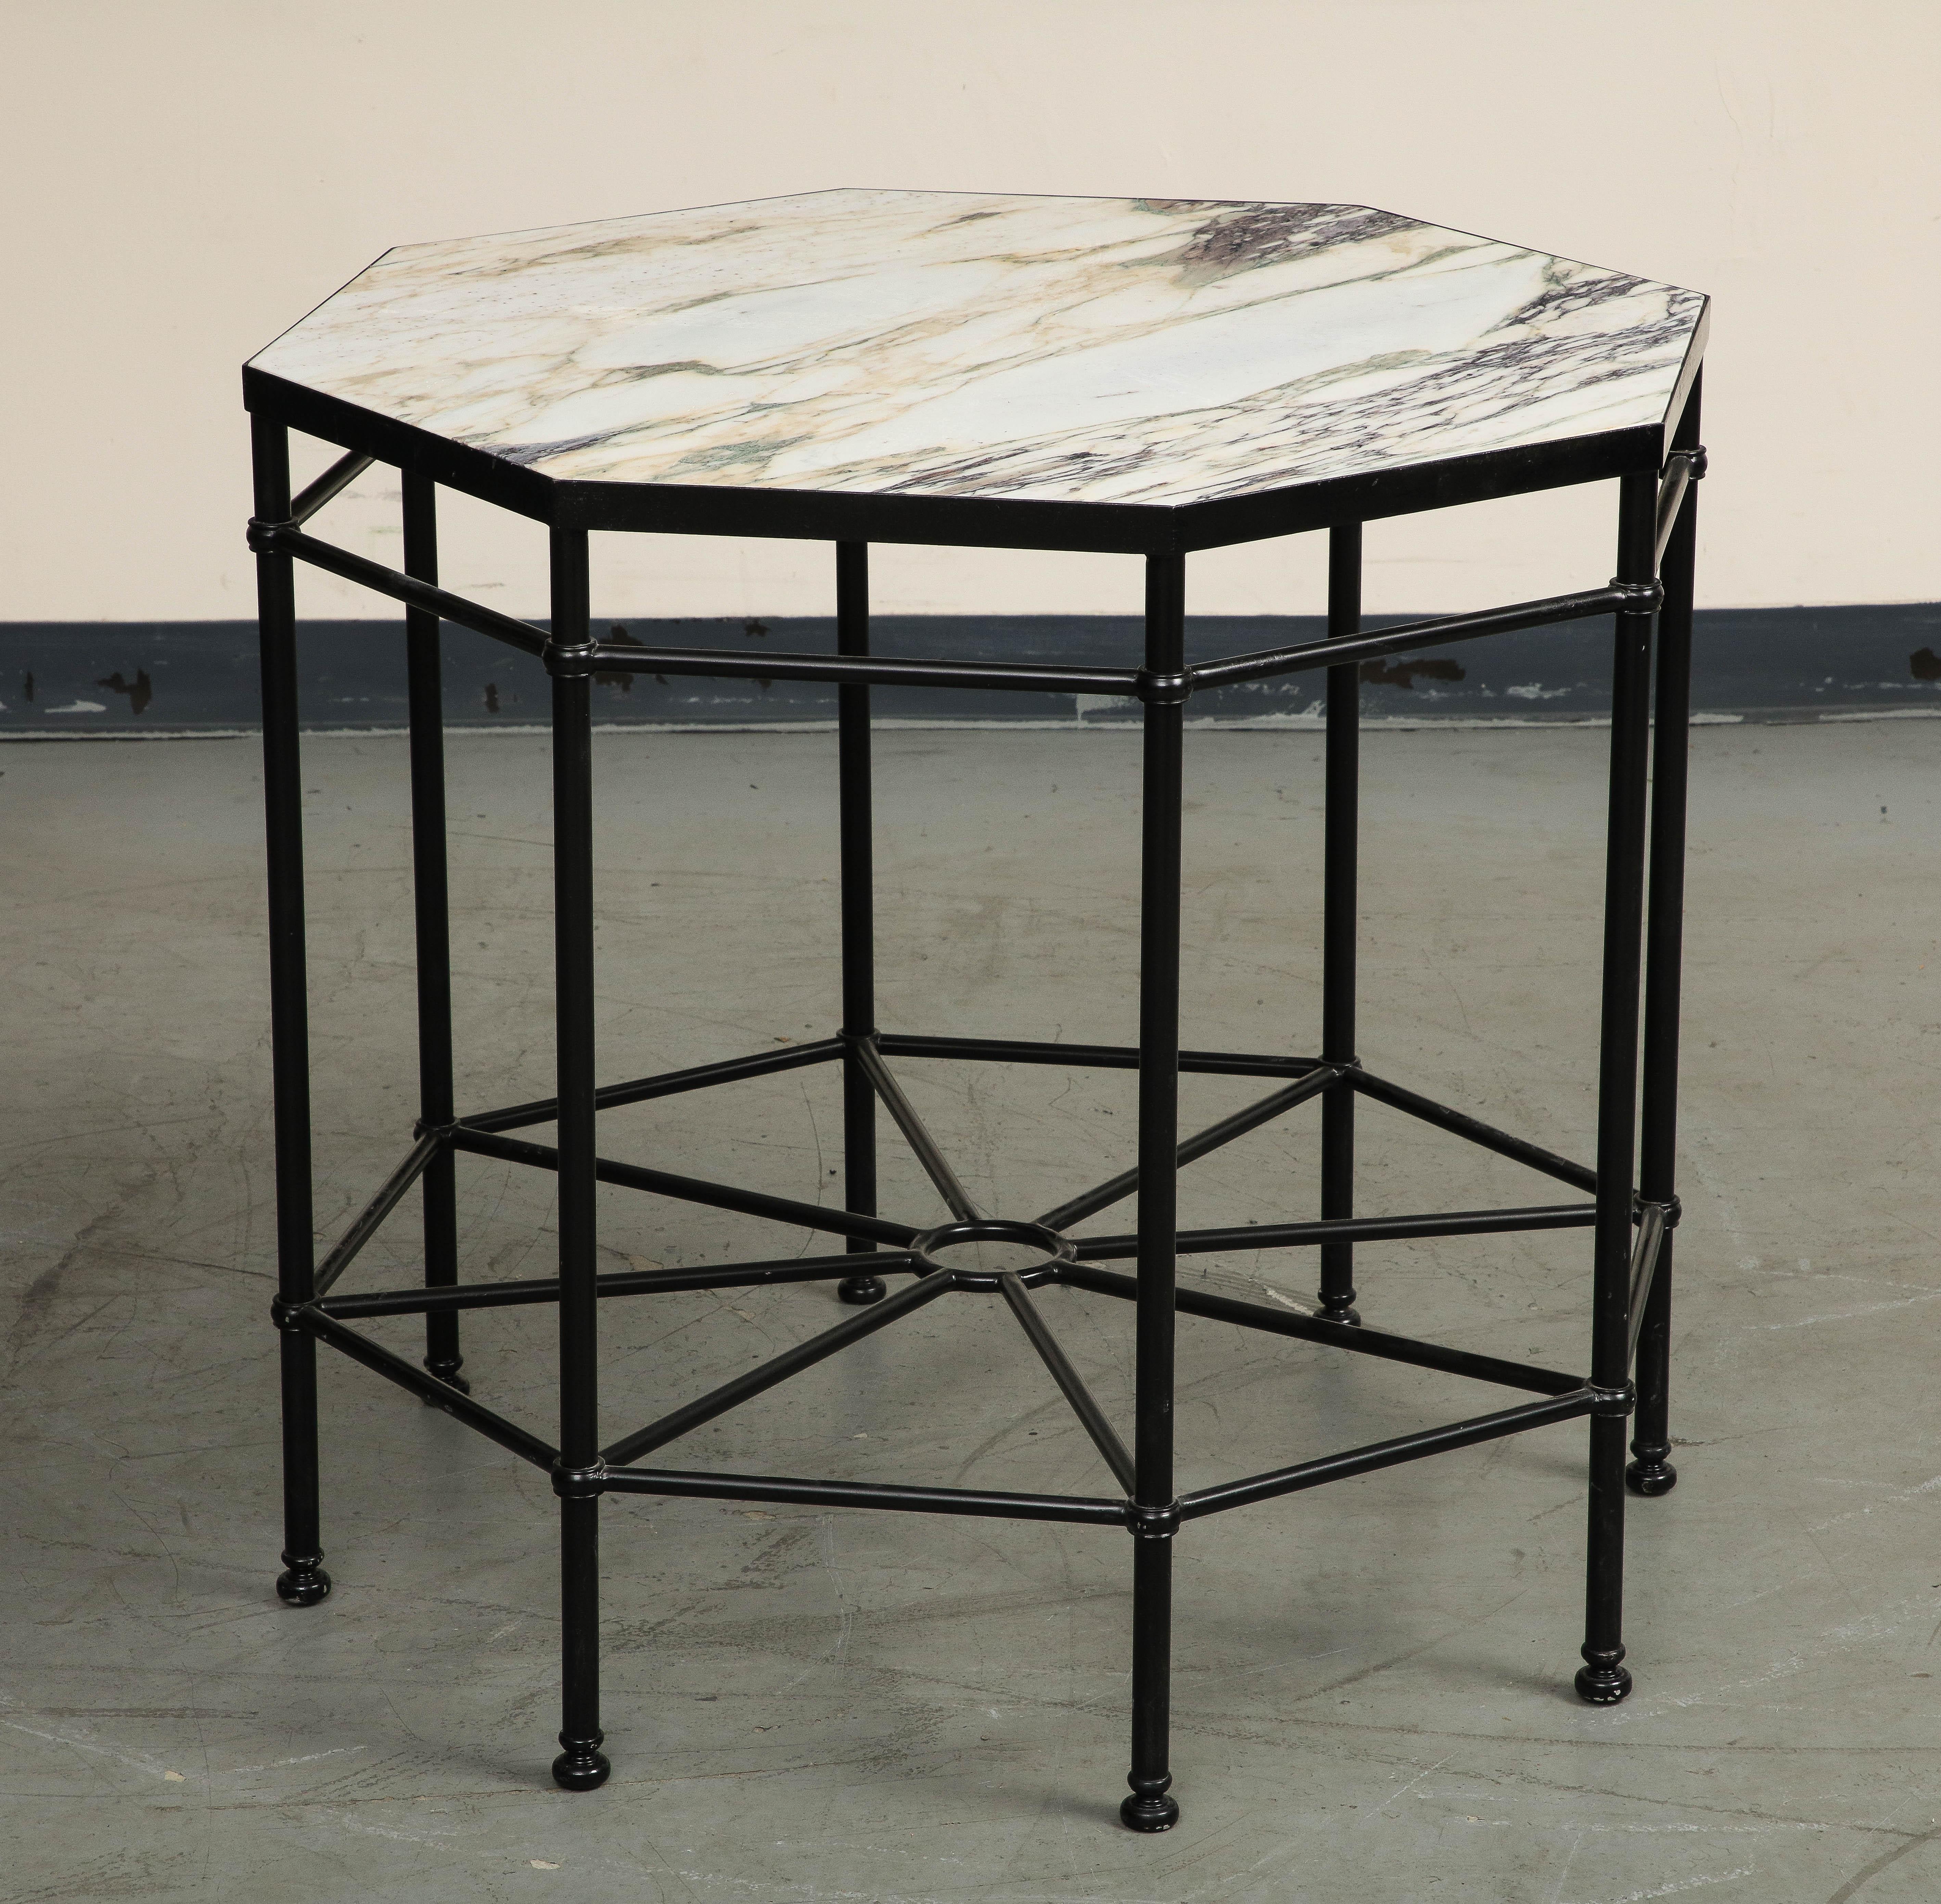 20th Century Octagonal Black Painted Steel Table with New Violetta Marble Top 2